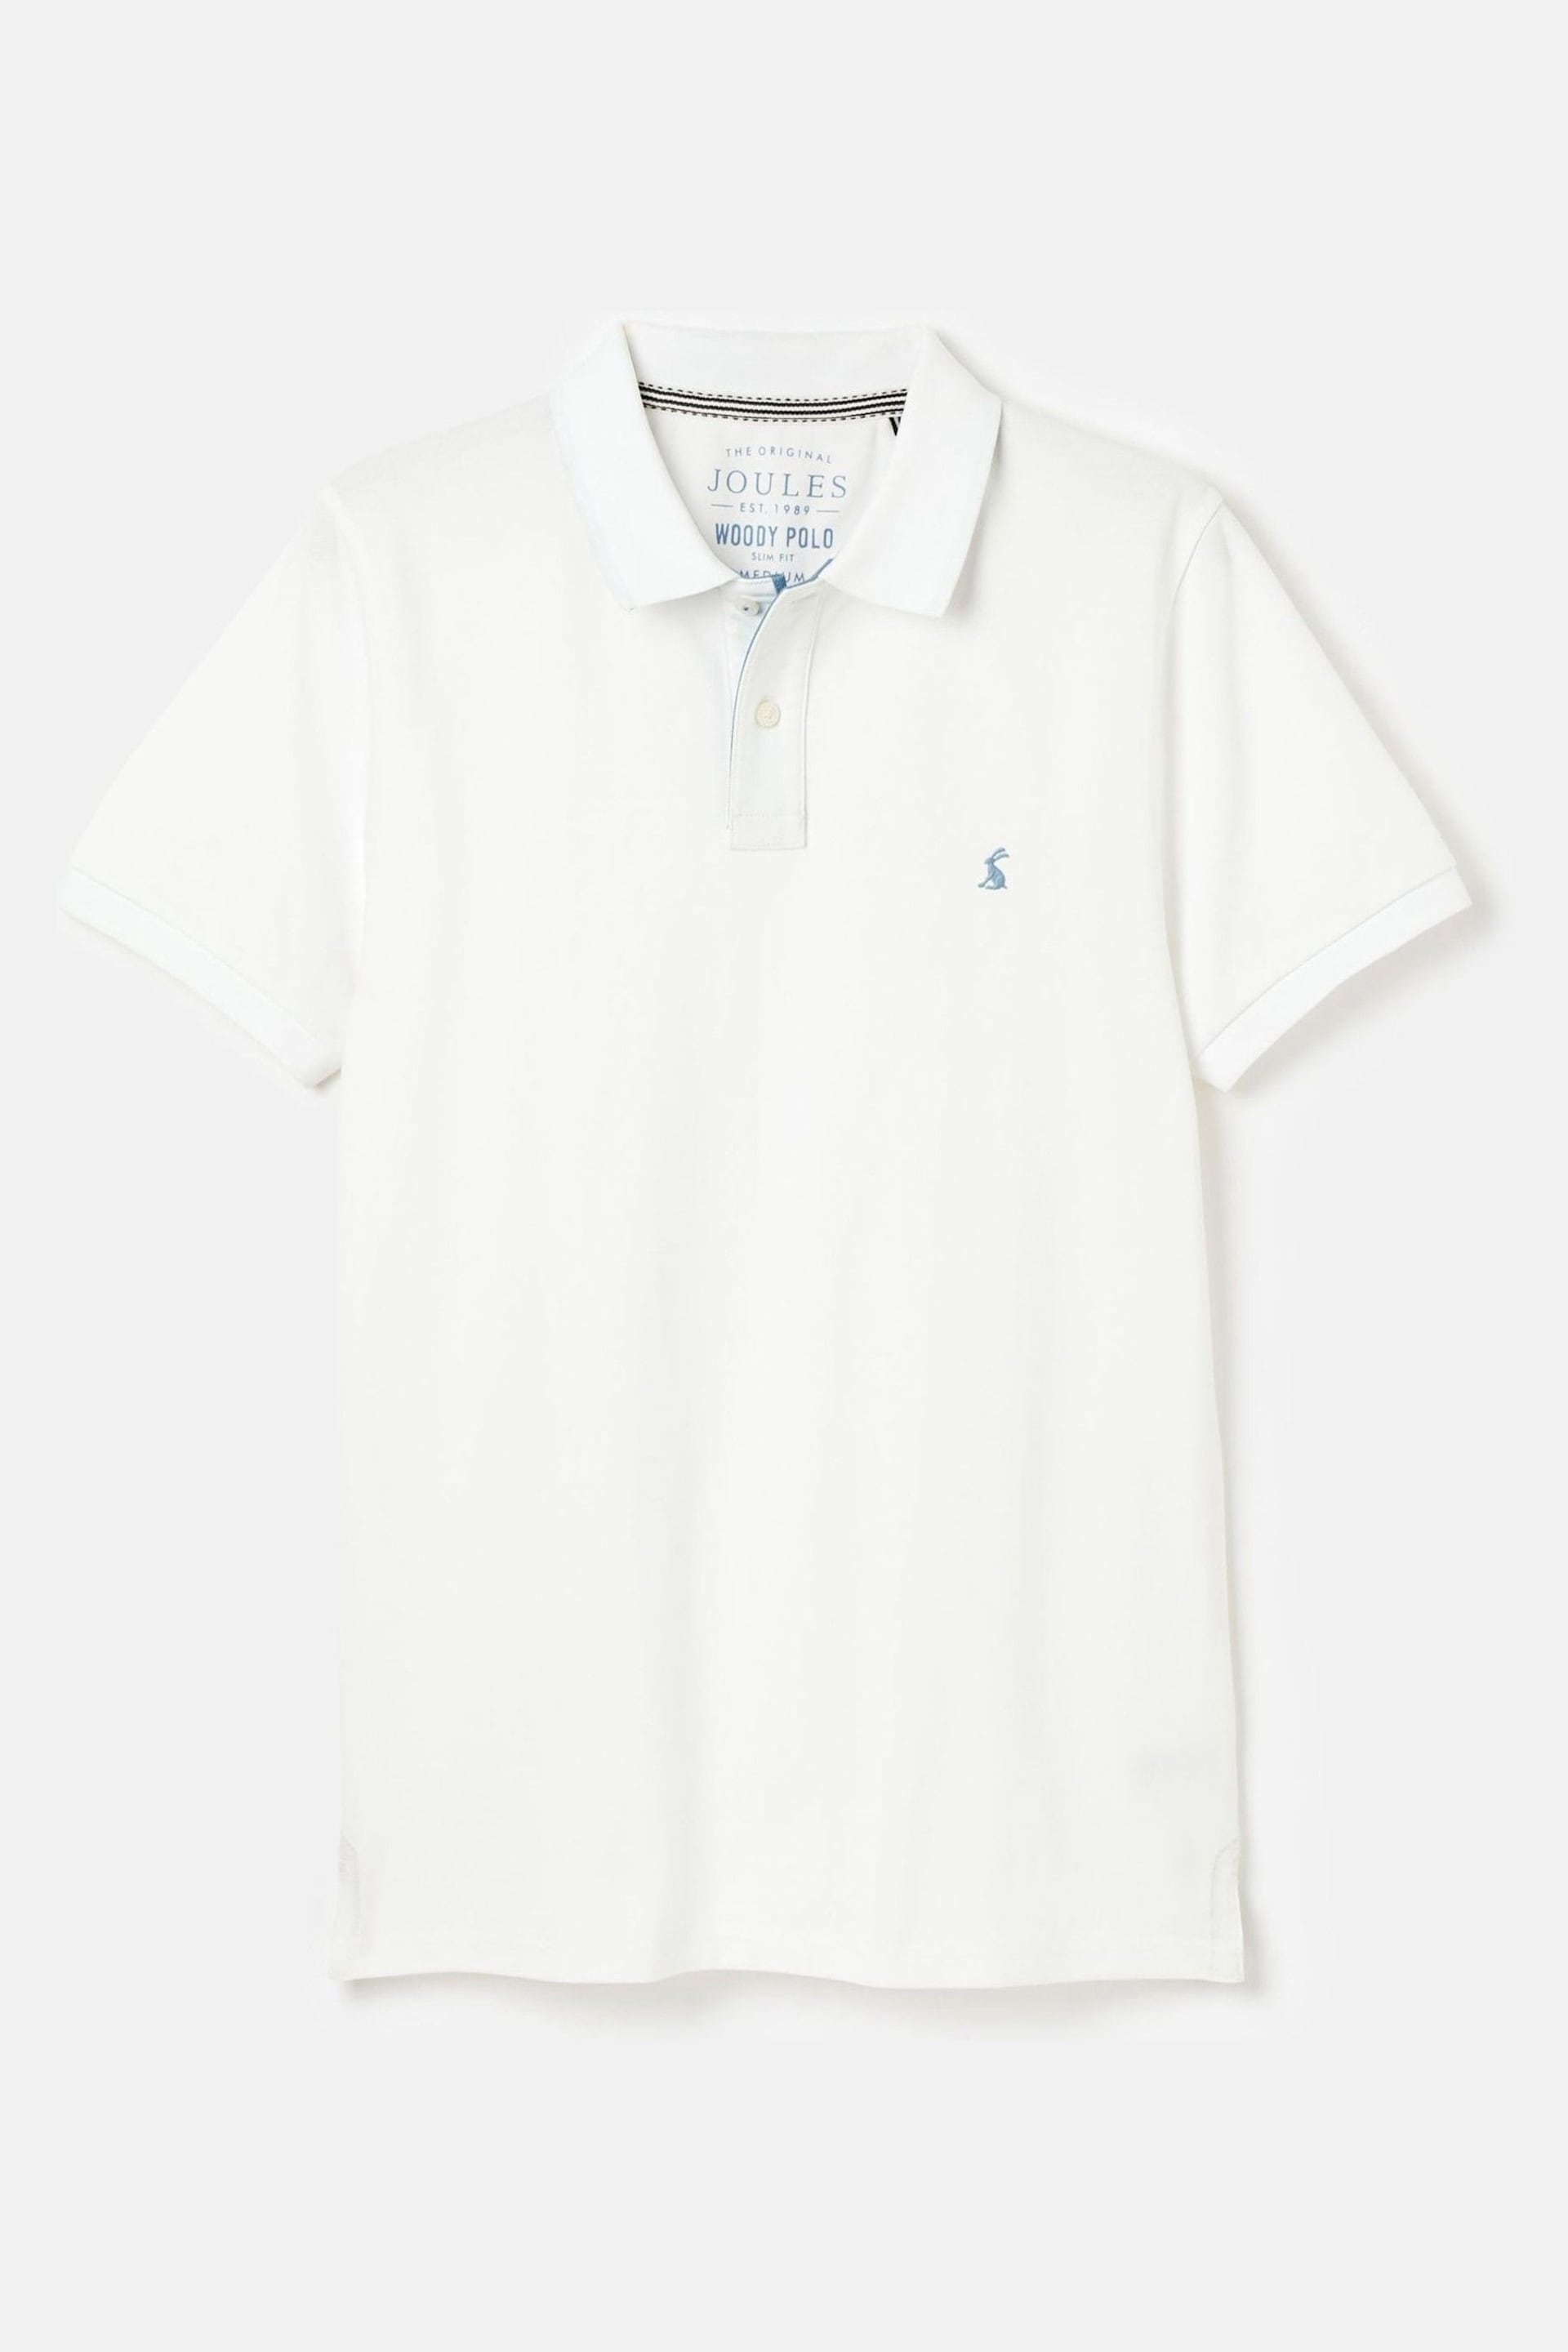 Joules Woody Chalk White Slim Fit Cotton Pique Polo Shirt - Image 6 of 6